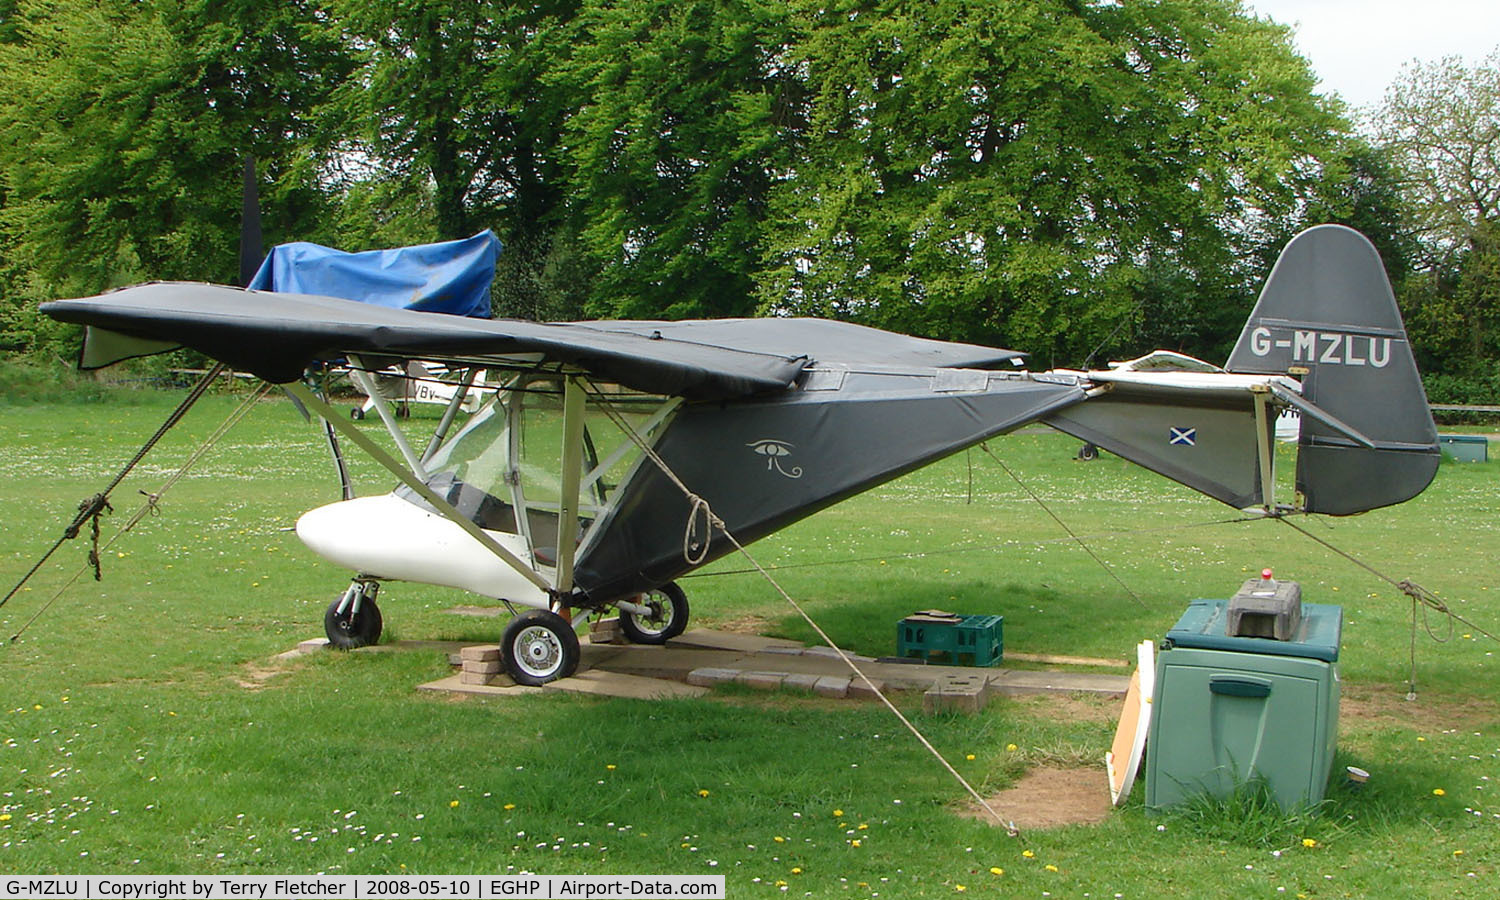 G-MZLU, 1998 Cyclone AX2000 C/N 7439, A very pleasant general Aviation day at Popham in rural UK